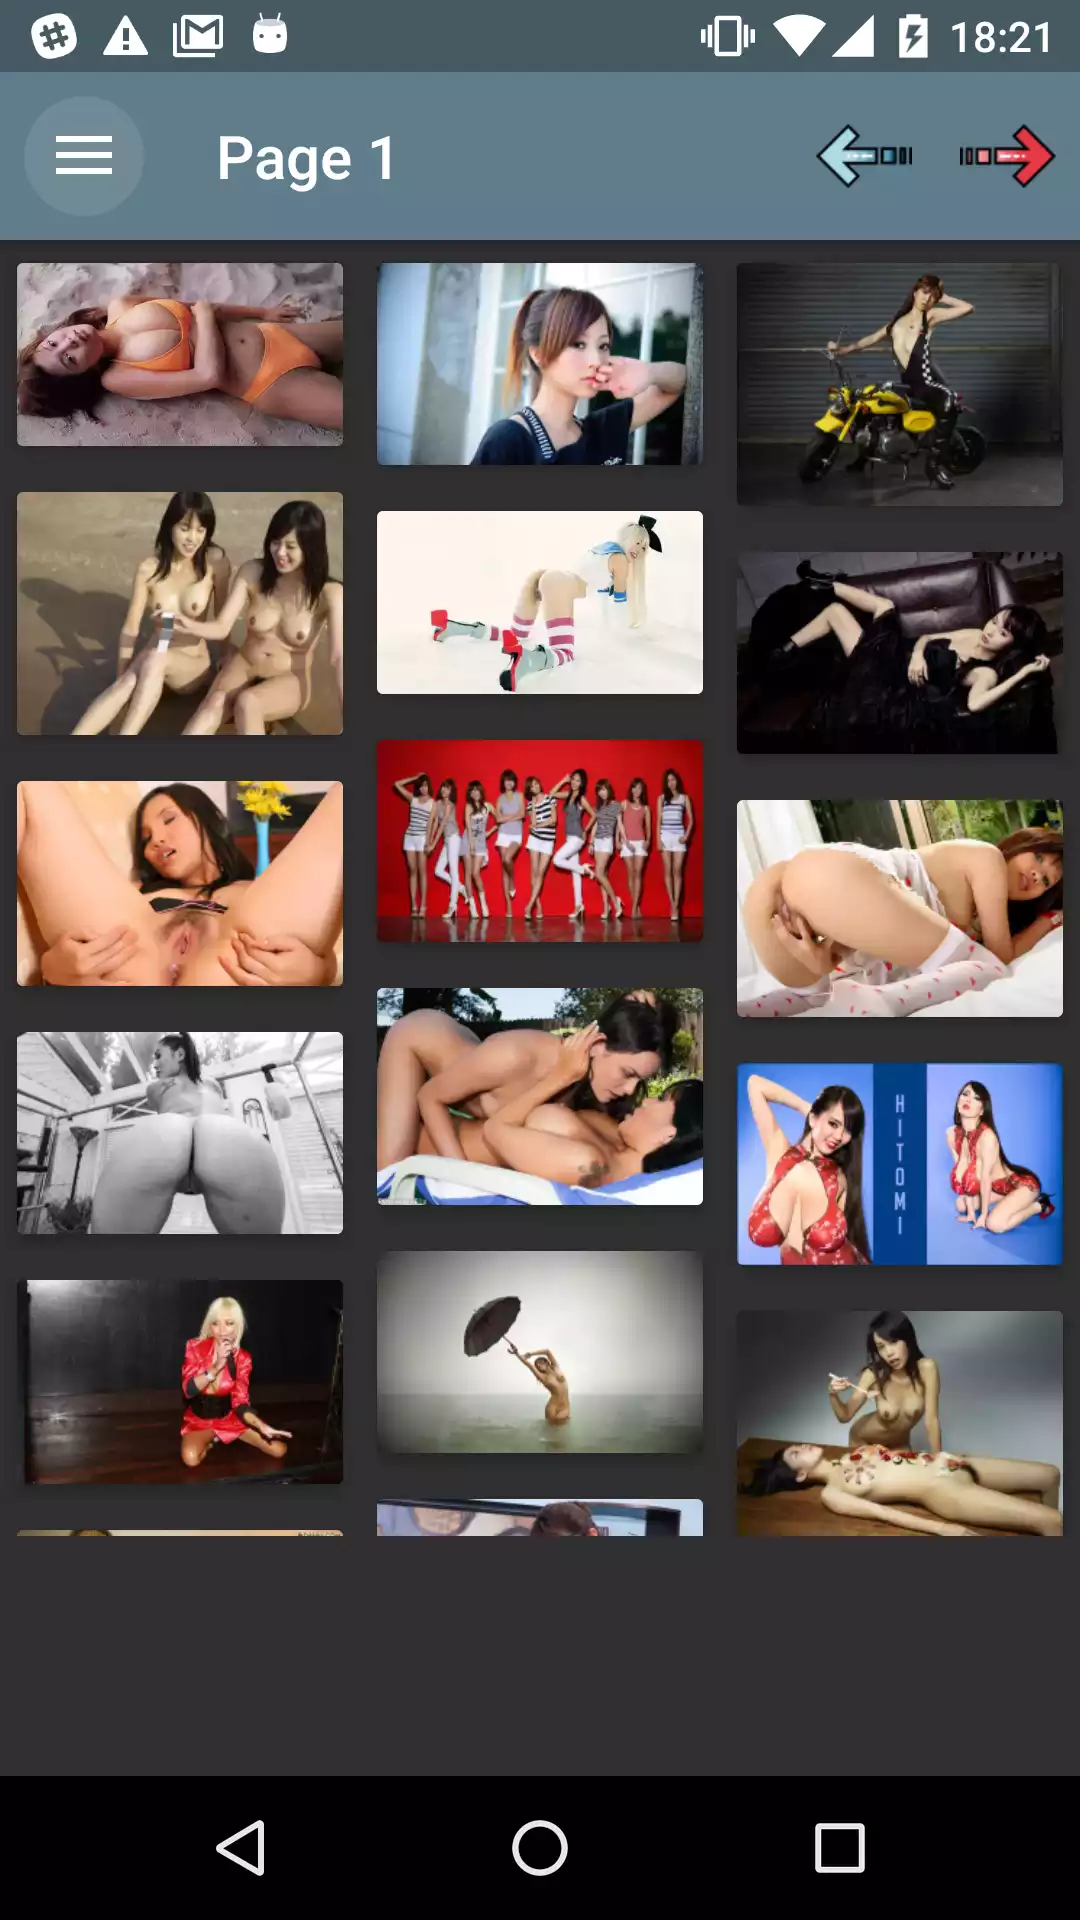 New Asian Wallpapers oictures,backgrounds,porn,android,sexy,adult,new,free,pic,aplikasi,with,wallpapers,hentai,caprice,anime,mature,photos,editor,apps,best,galleries